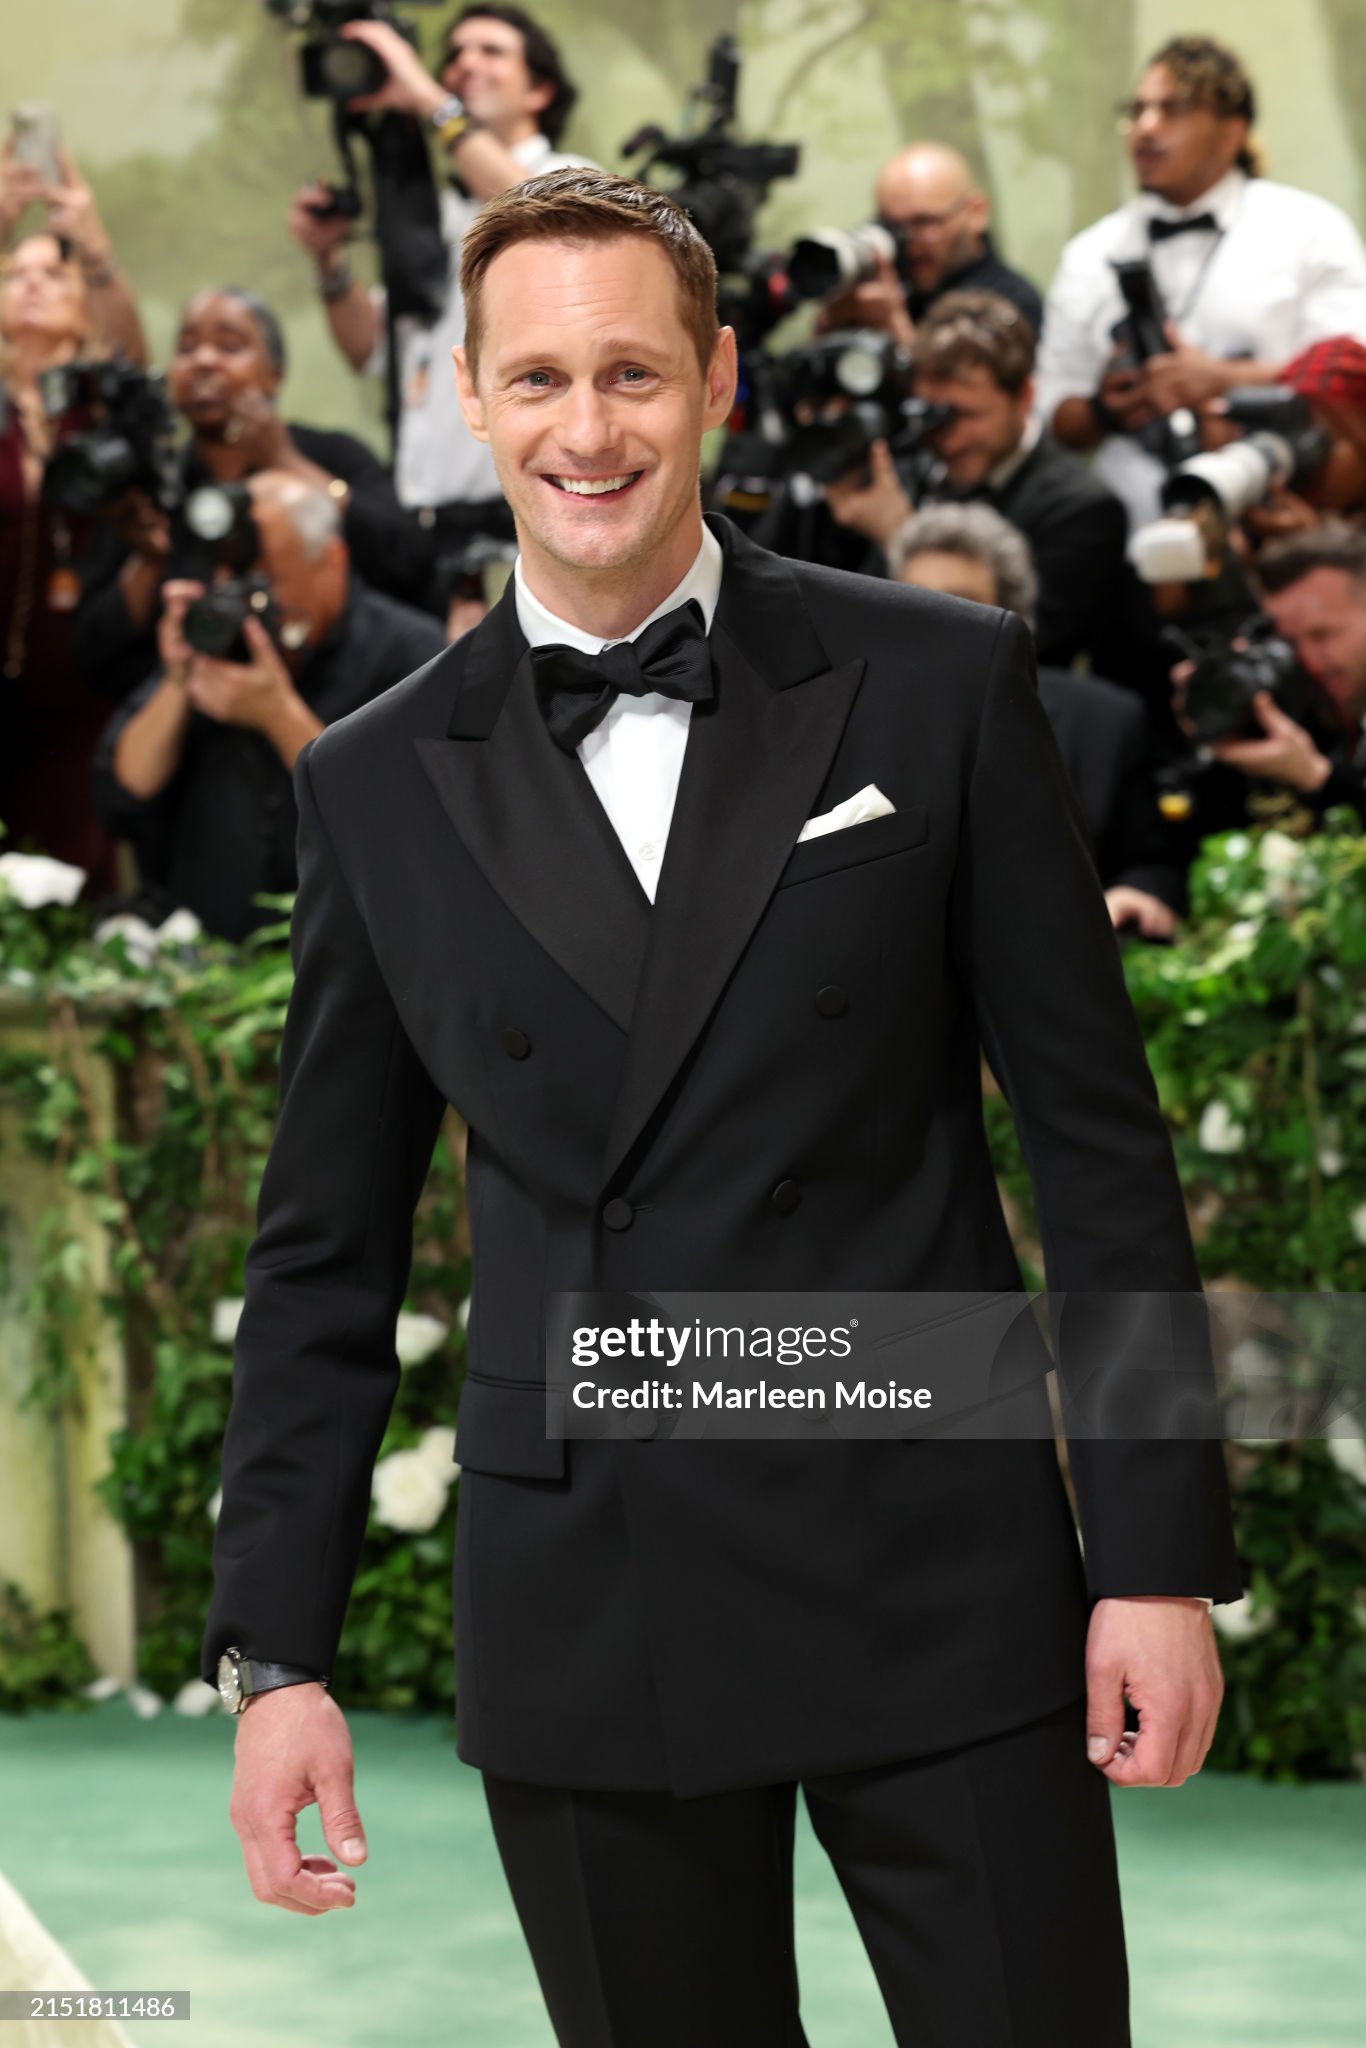 gettyimages-2151811486-2048x2048.jpg